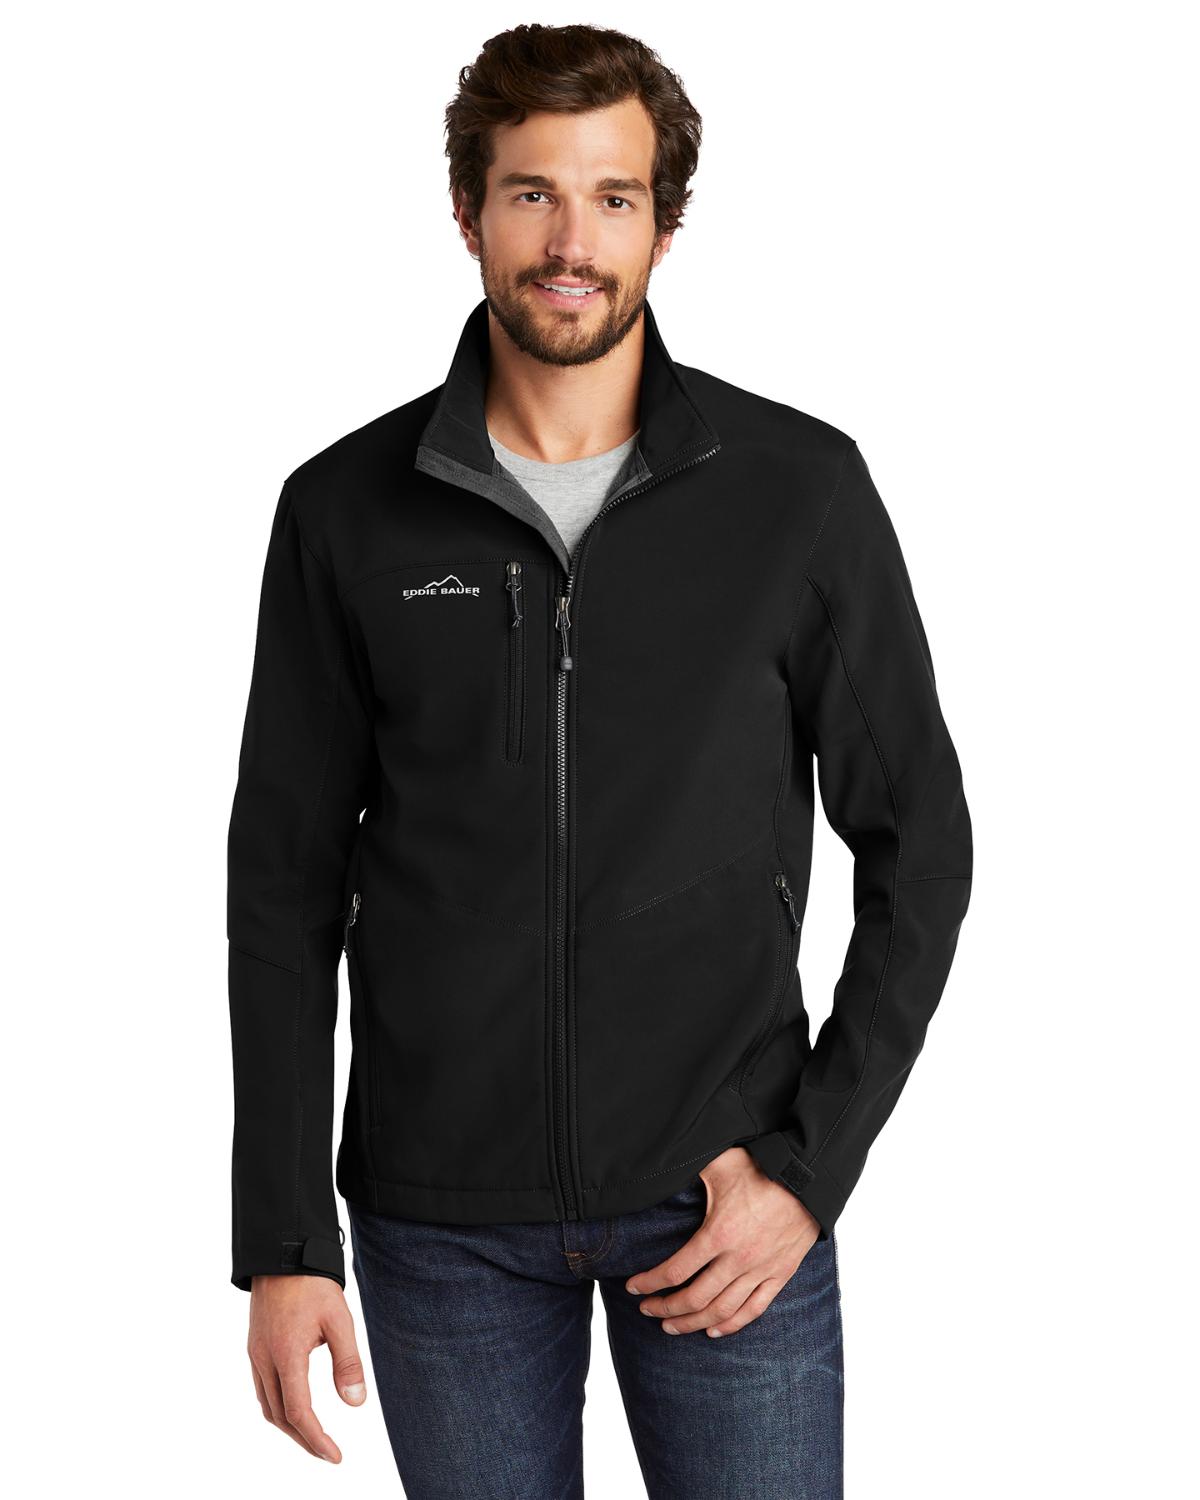 Size Chart for Eddie Bauer EB530 Mens Soft Shell Jacket - A2ZClothing.com